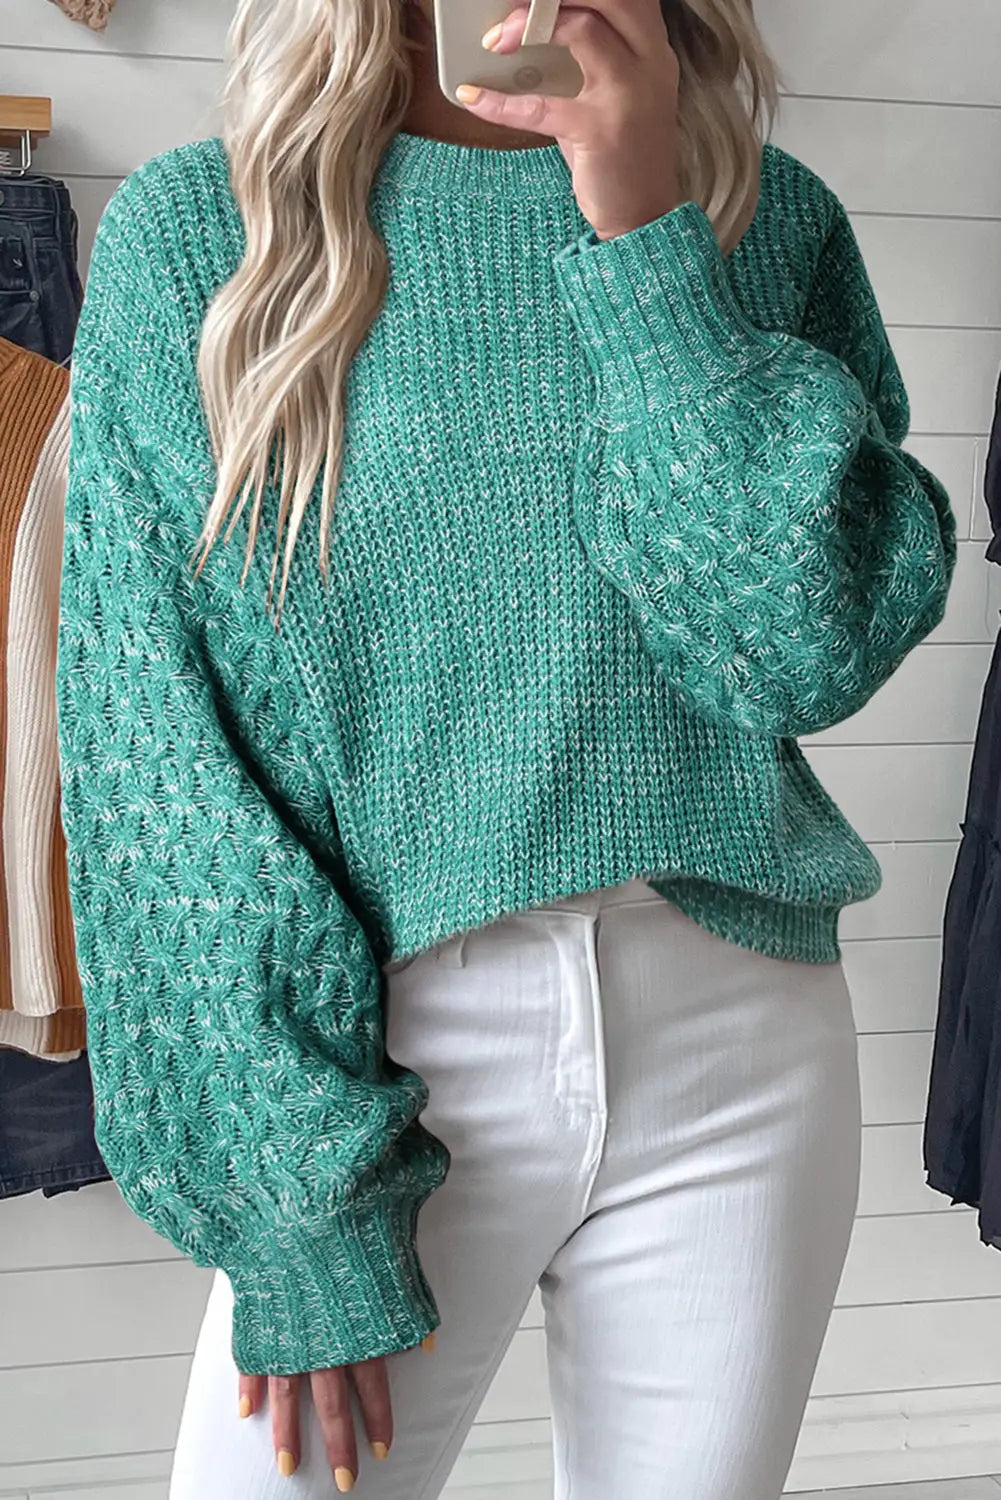 Sea green cable knit sleeve drop shoulder sweater - s / 100% acrylic - sweaters & cardigans